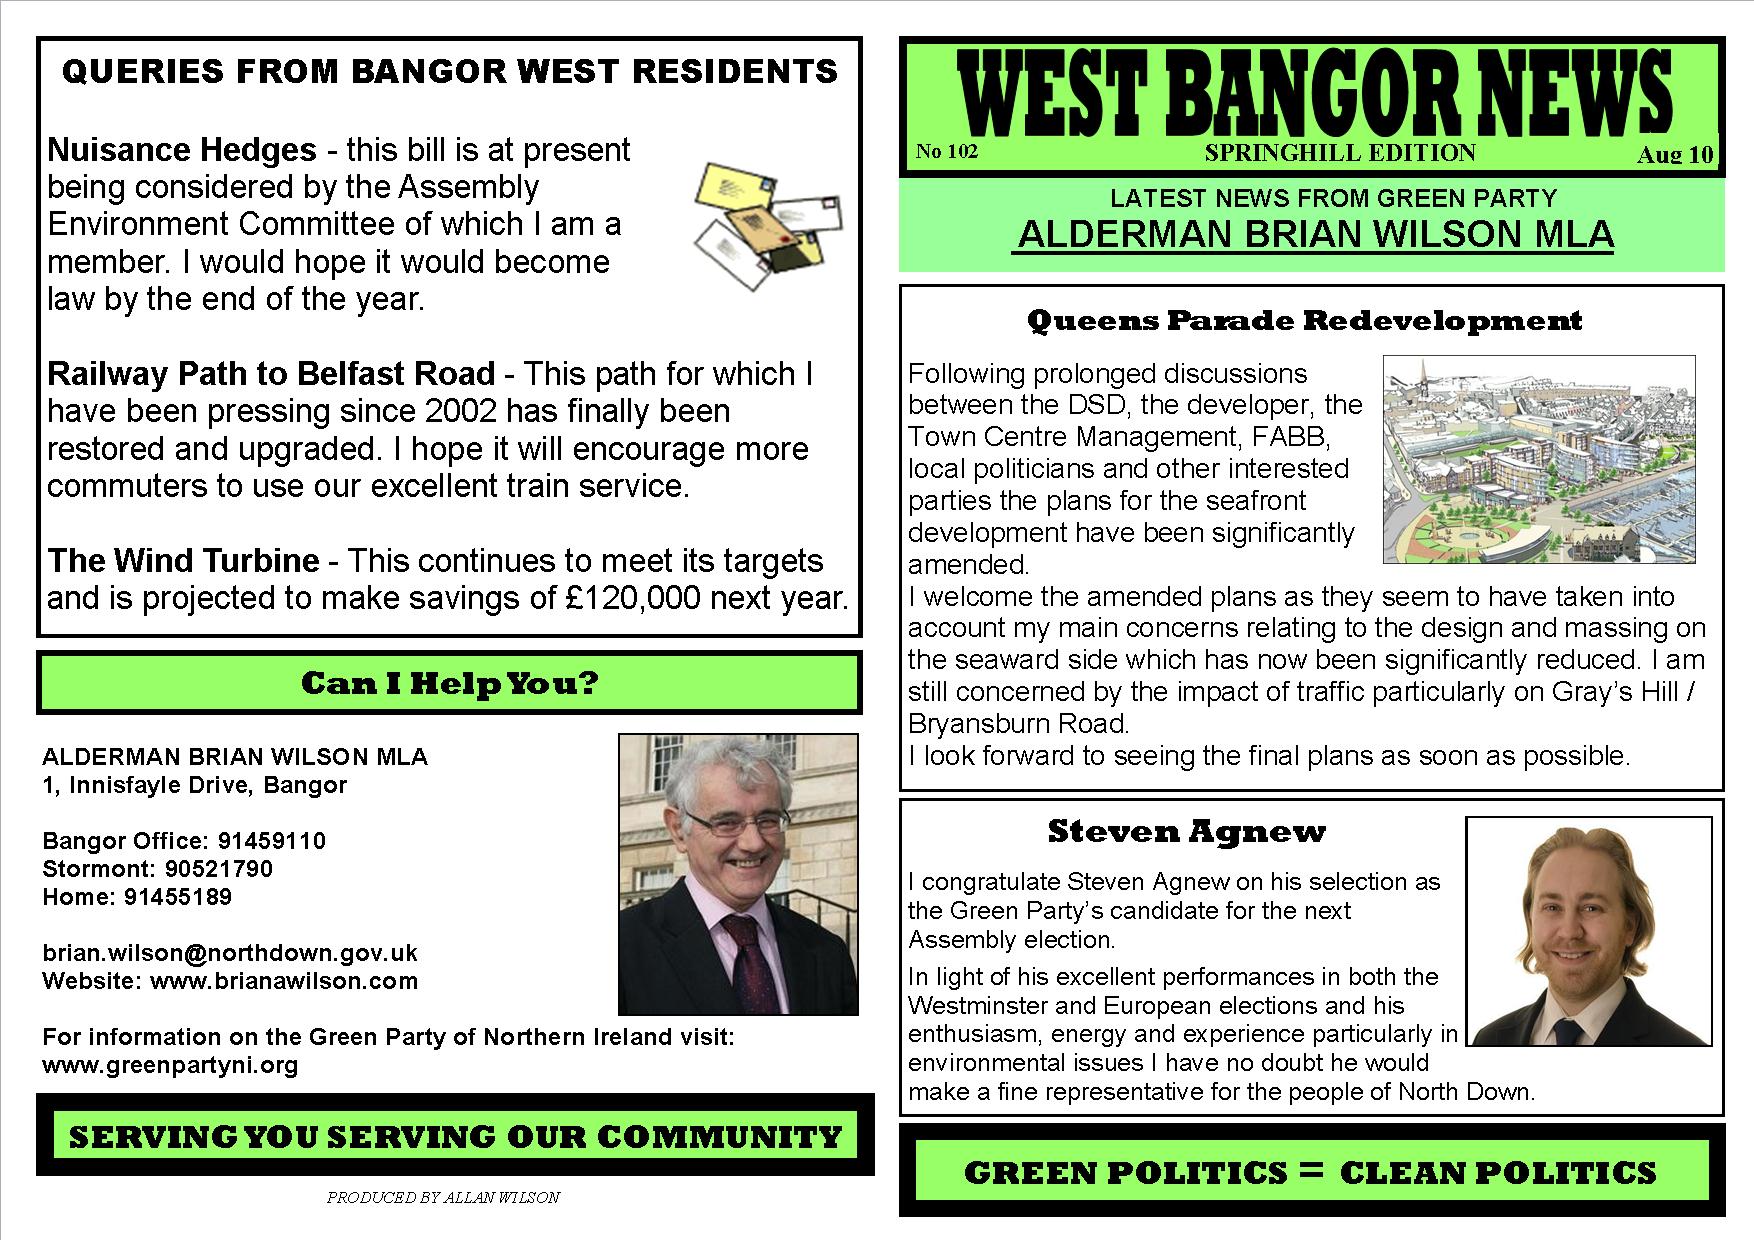 West Bangor News (102) - Summer 2010. Brian Wilson North Down Councillor, first Green Party MLA in Northern Ireland